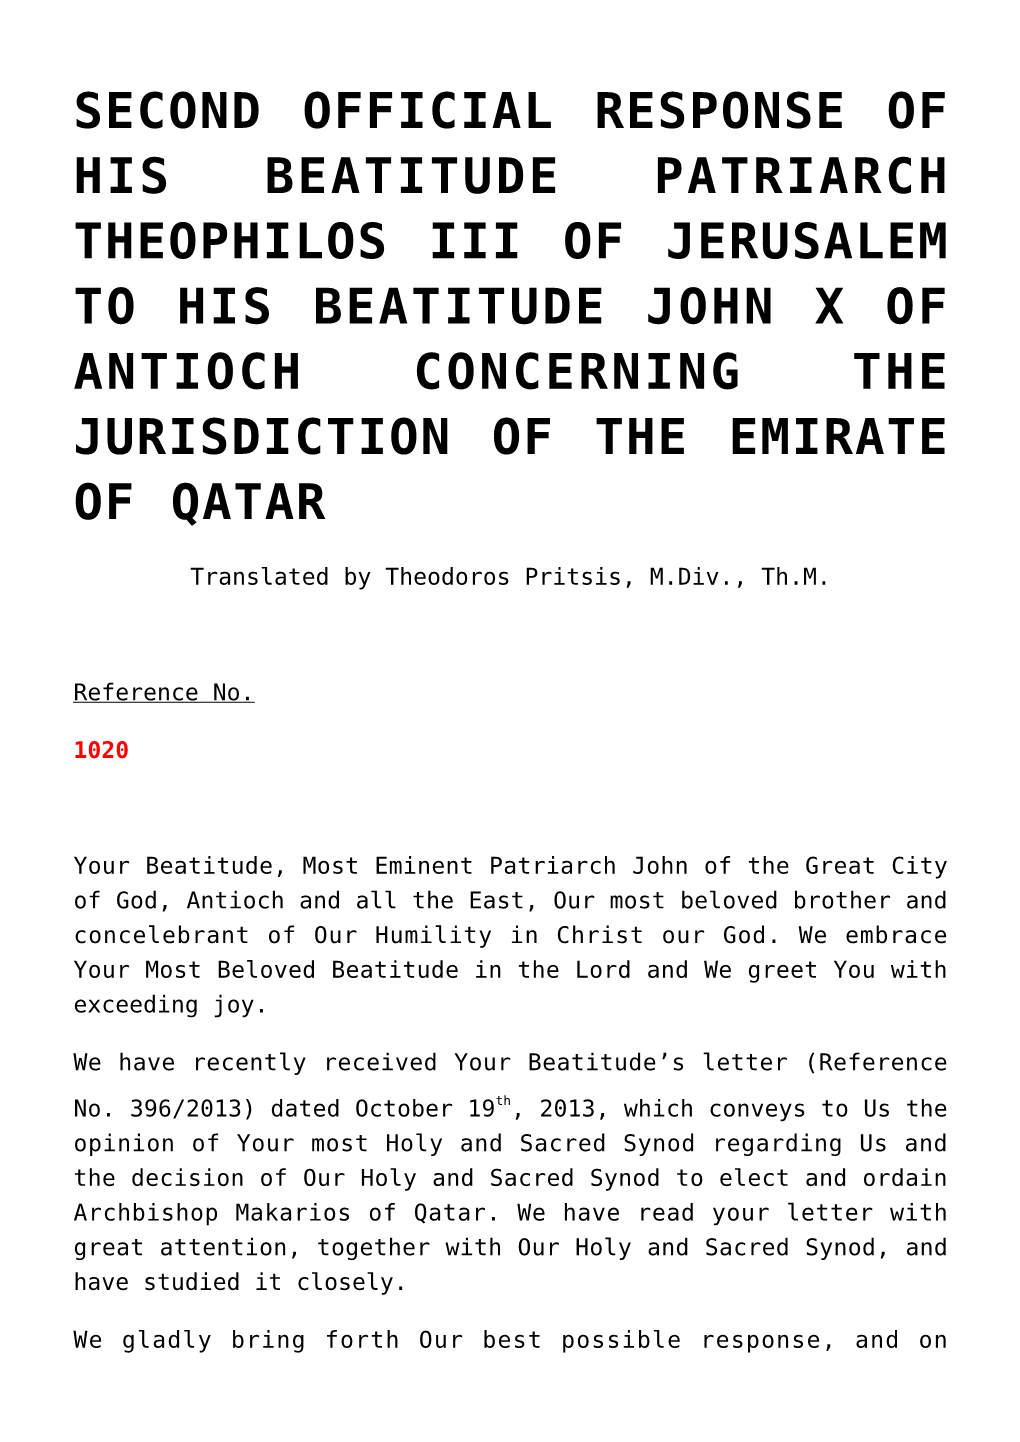 Second Official Response of His Beatitude Patriarch Theophilos Iii of Jerusalem to His Beatitude John X of Antioch Concerning the Jurisdiction of the Emirate of Qatar